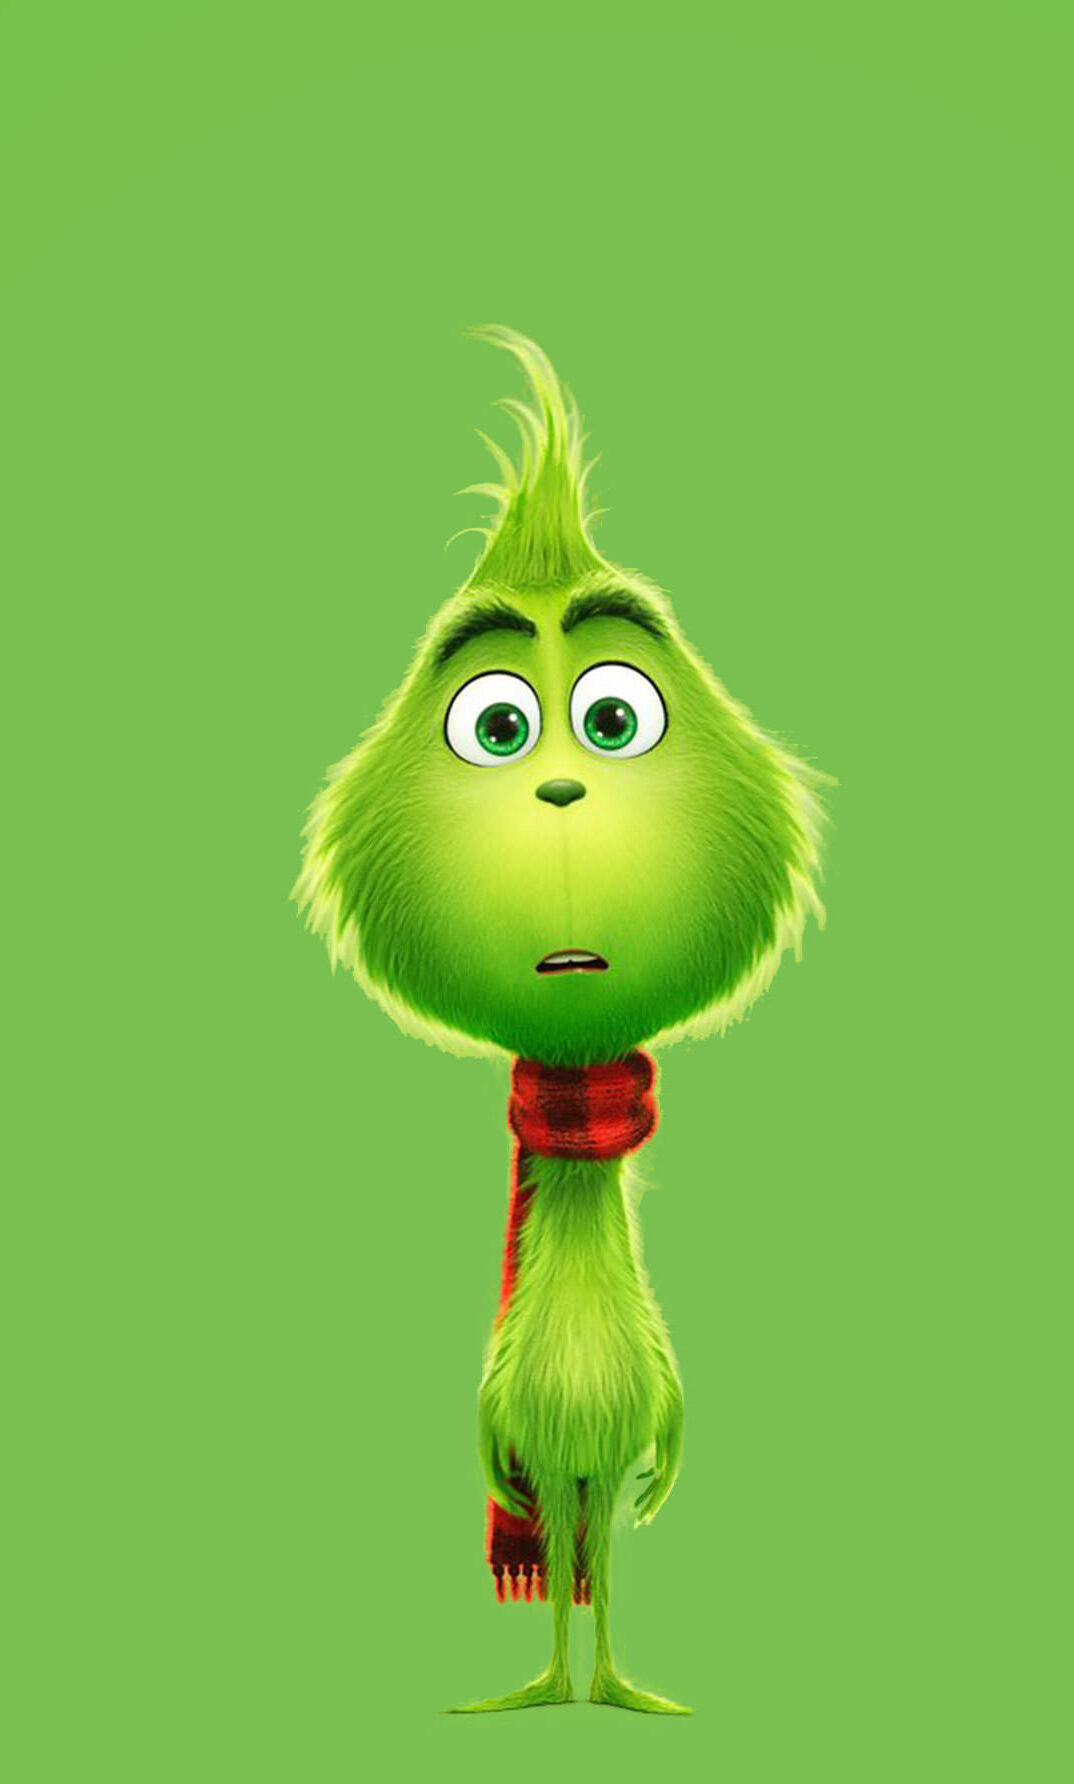 Christmas Grinch 4K HD The Grinch Wallpapers  HD Wallpapers  ID 51356